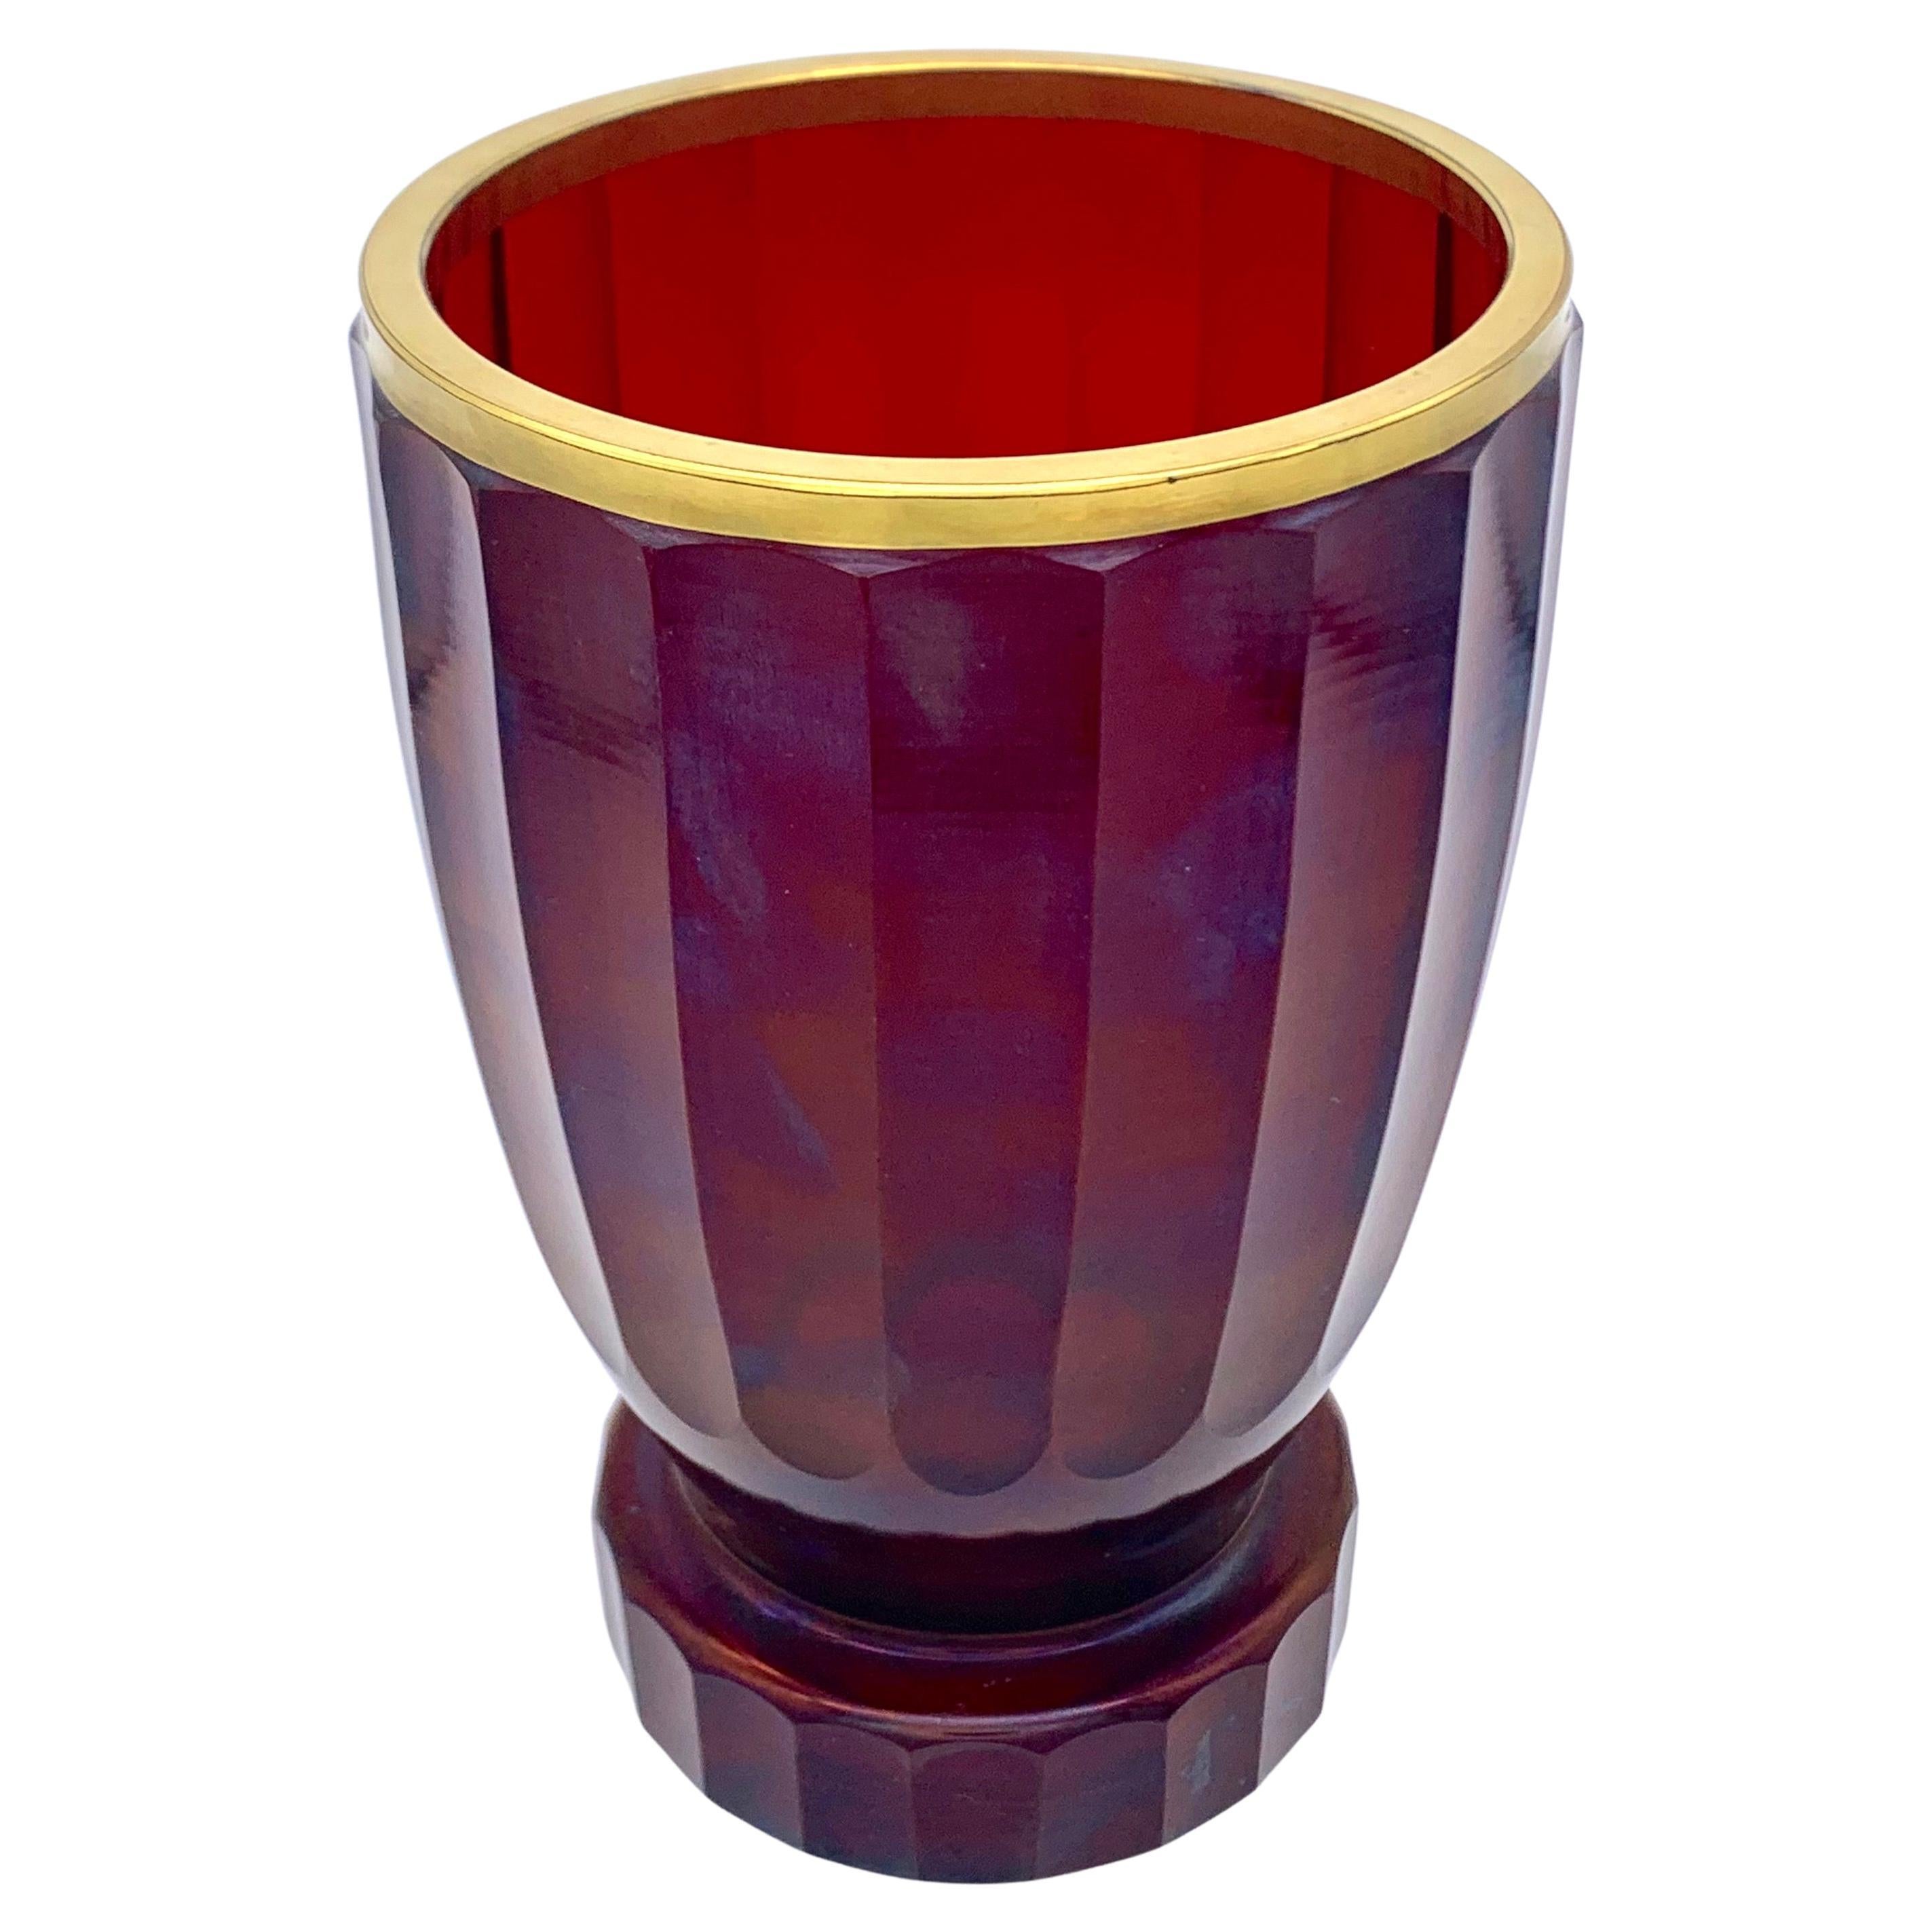 This faceted ruby glass is of elegant and fine proportions.